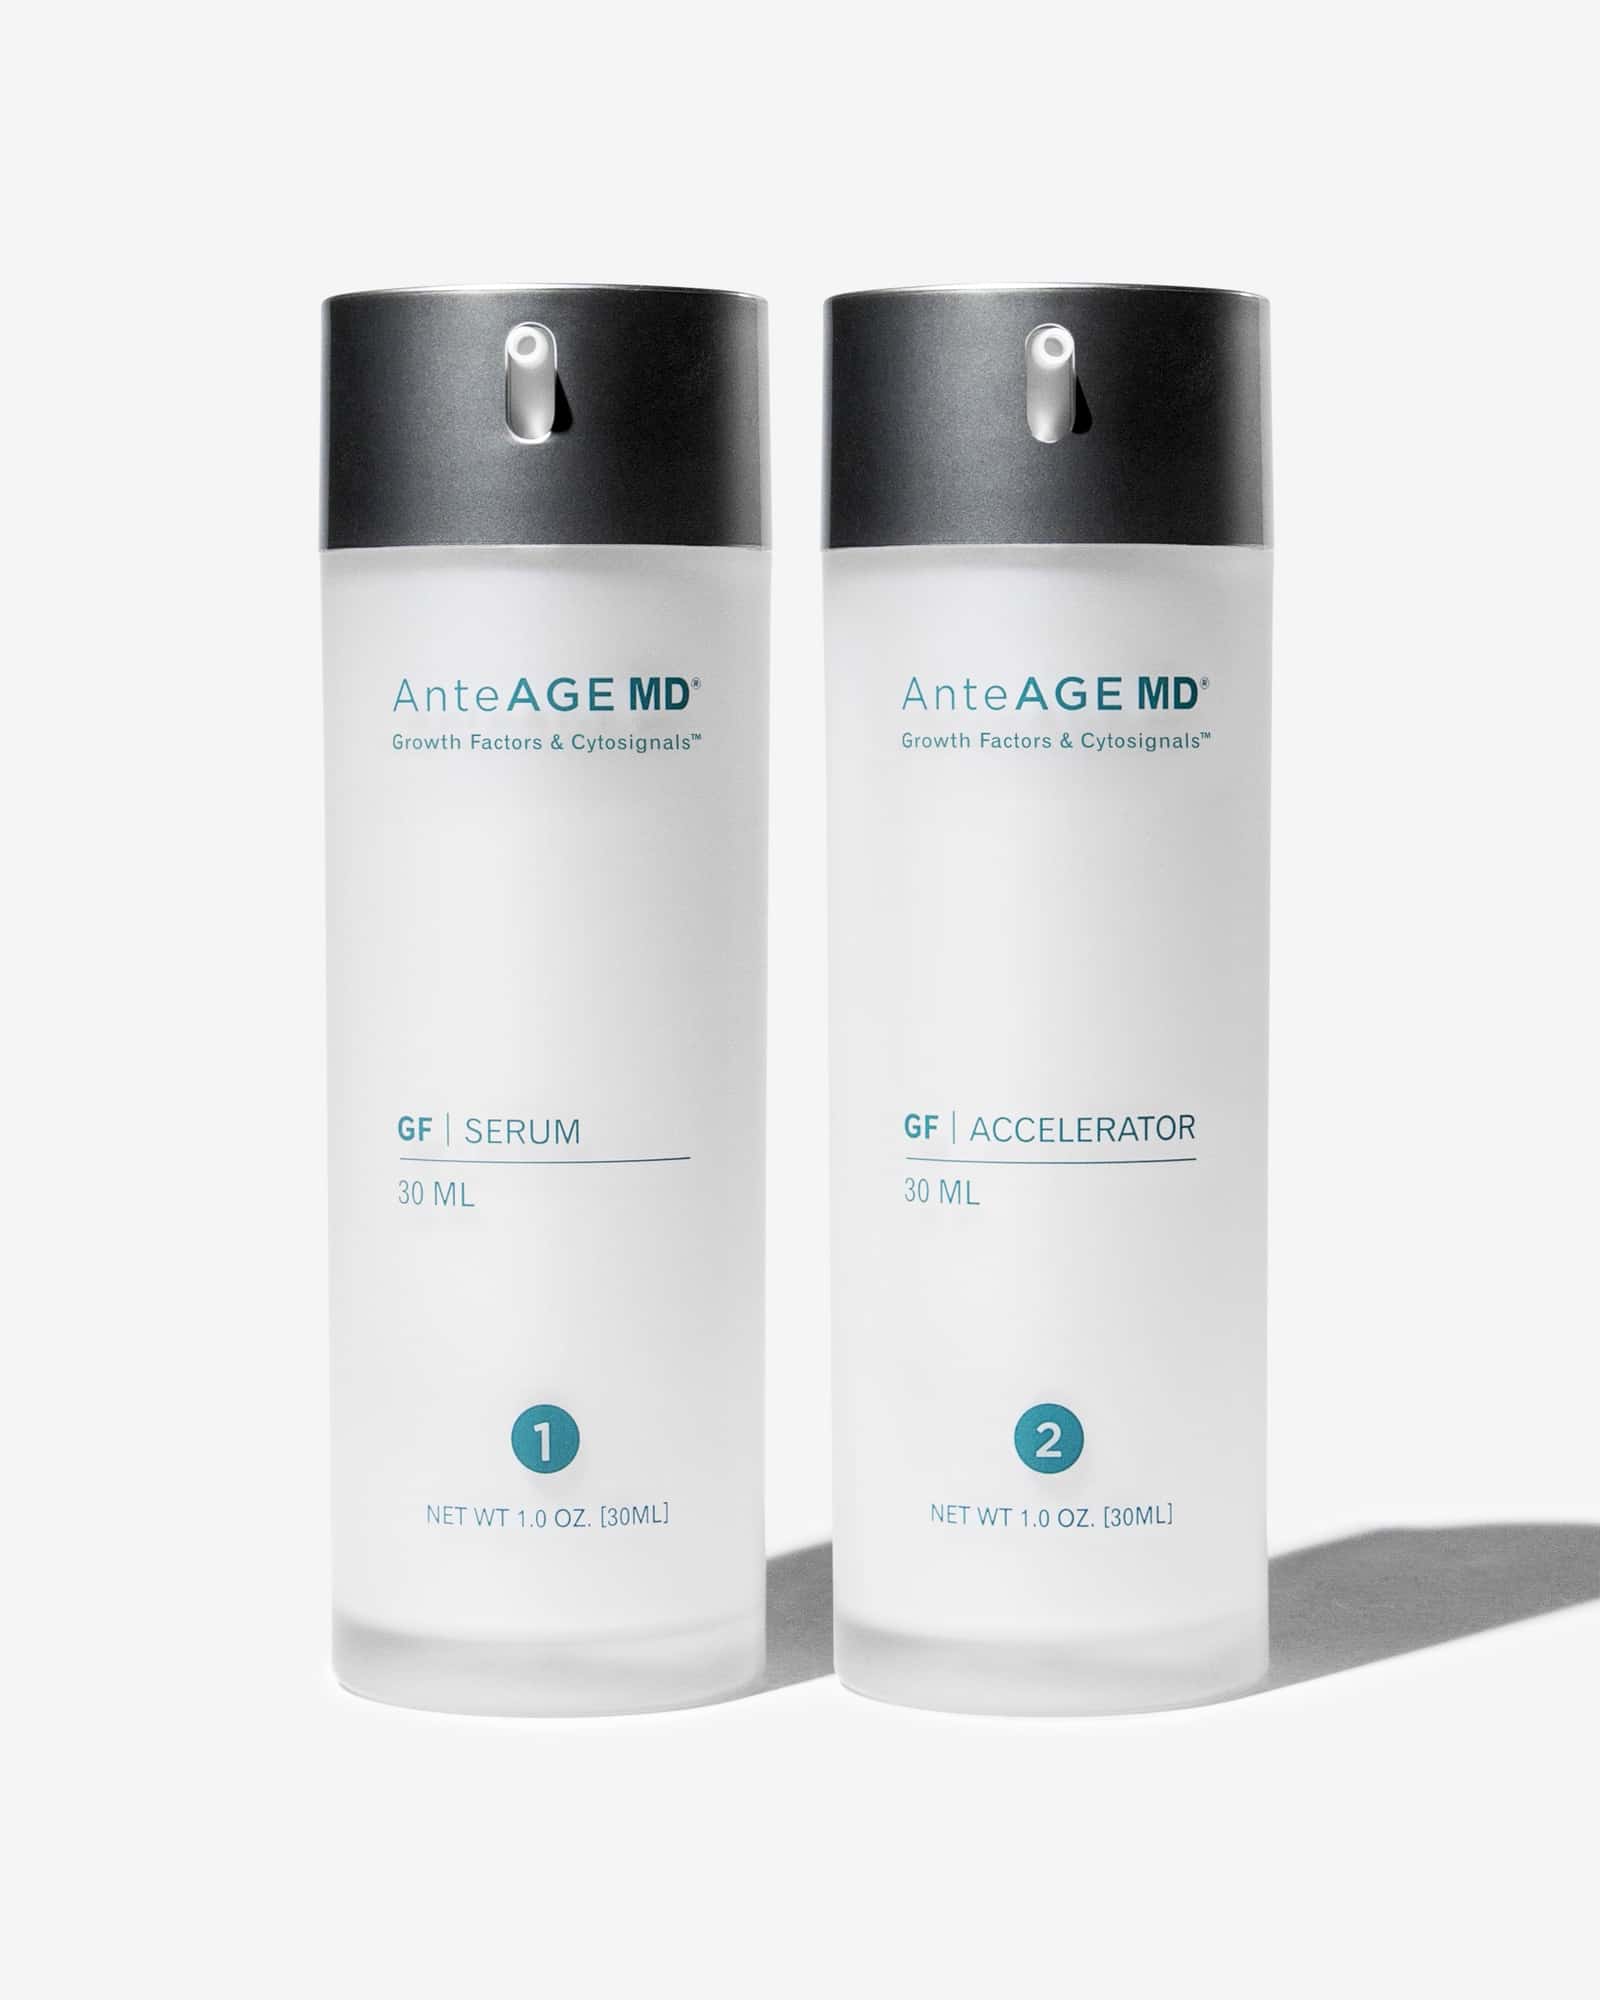 Best Anti Aging Skin Care | AnteAGE MD System | JolieClinic